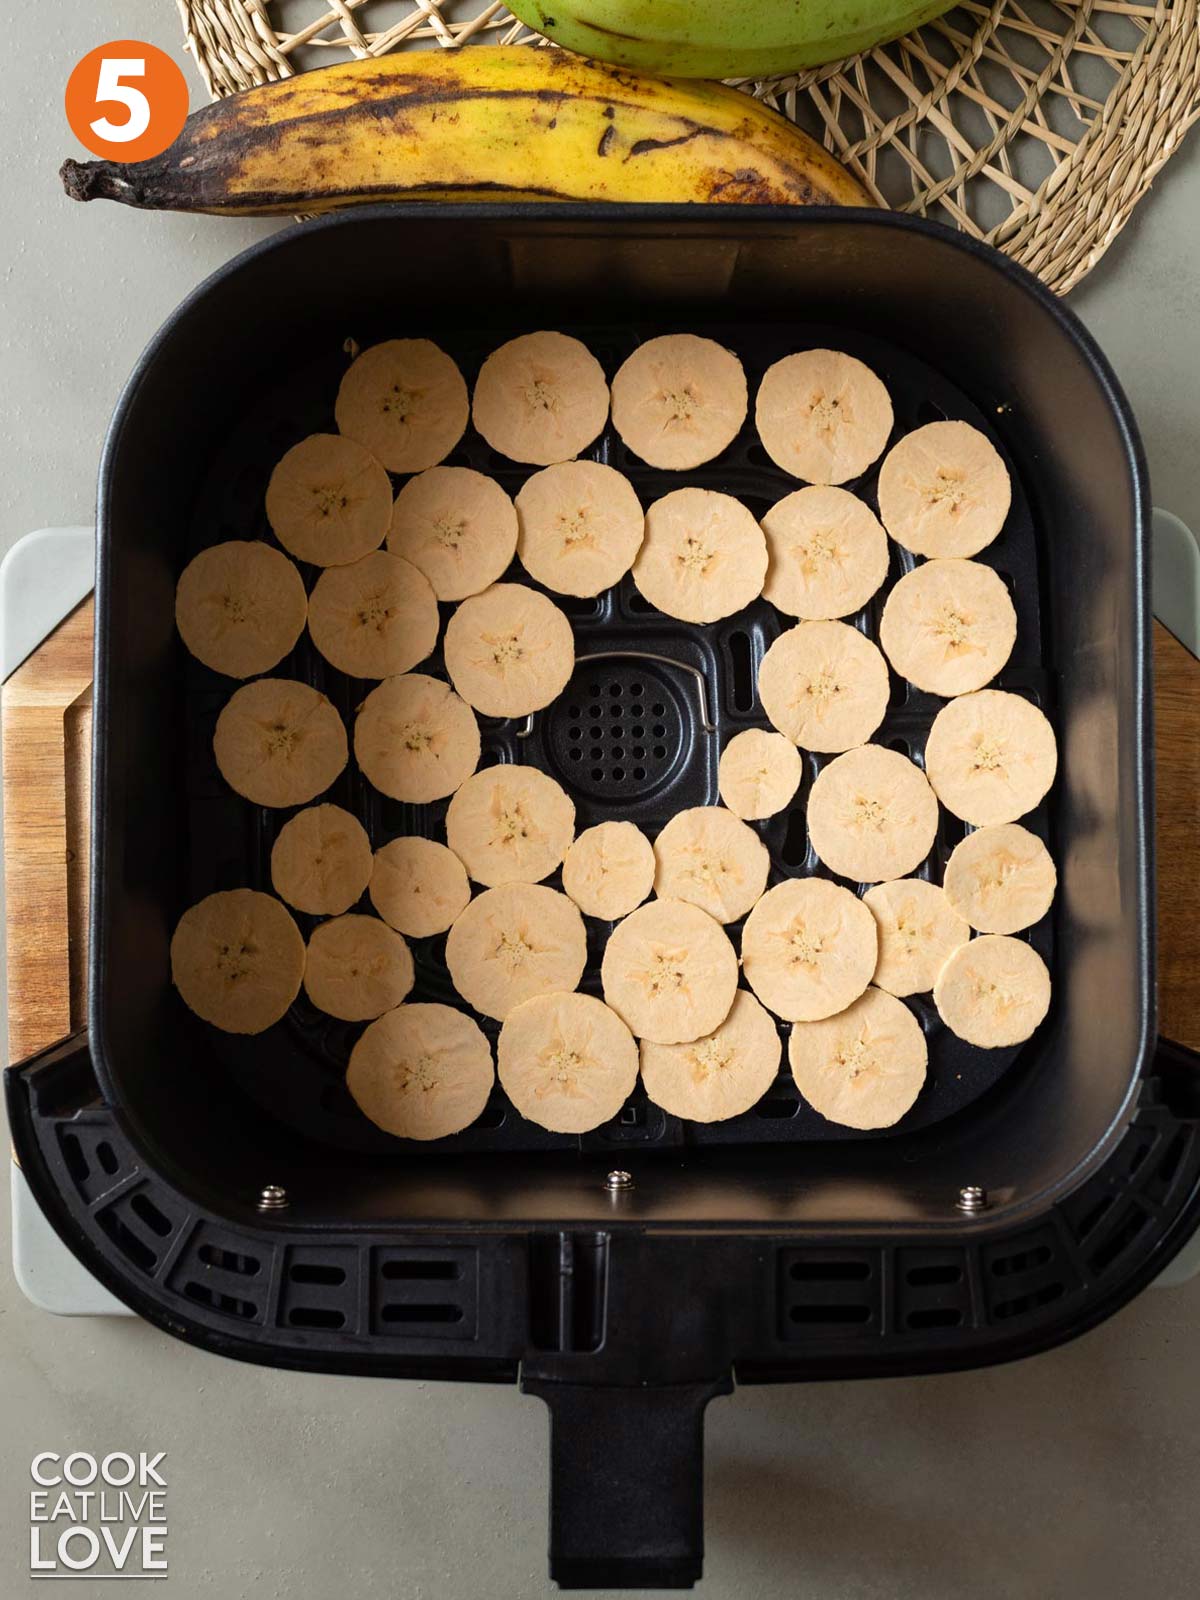 Plantains layered into air fryer basket to cook.